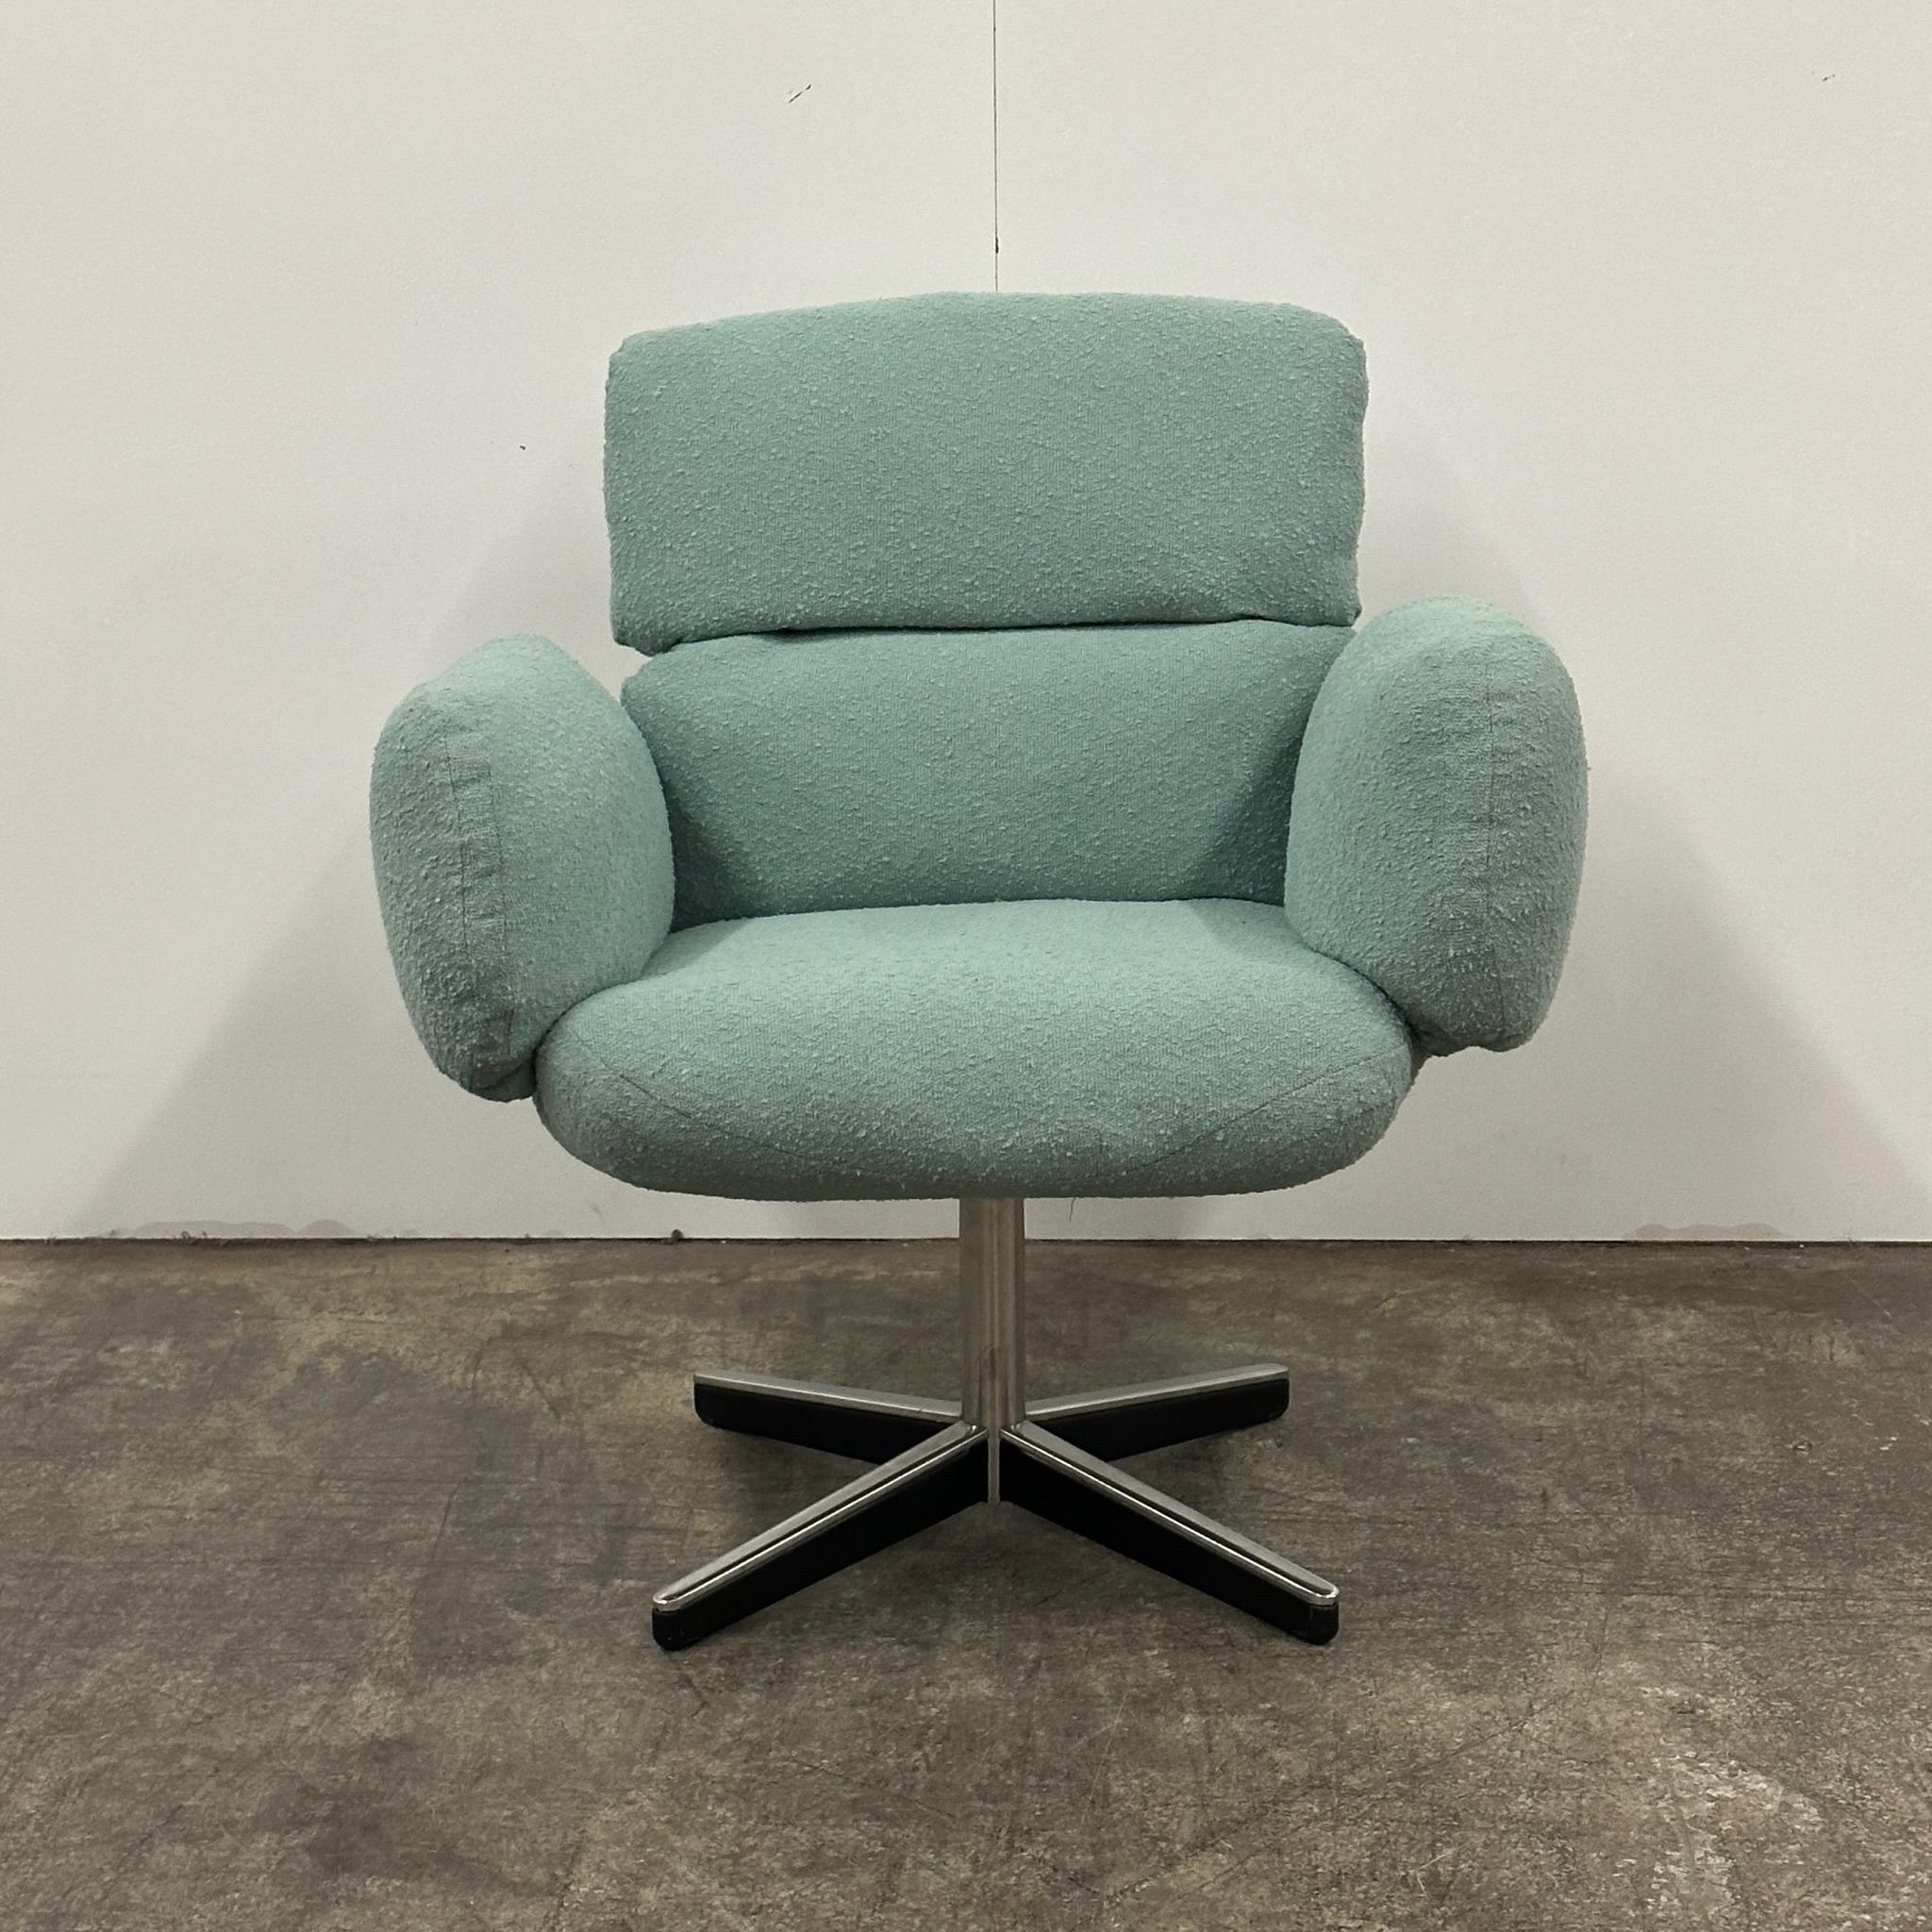 American Executive Low Back Office Chair by Otto Zapf for Knoll